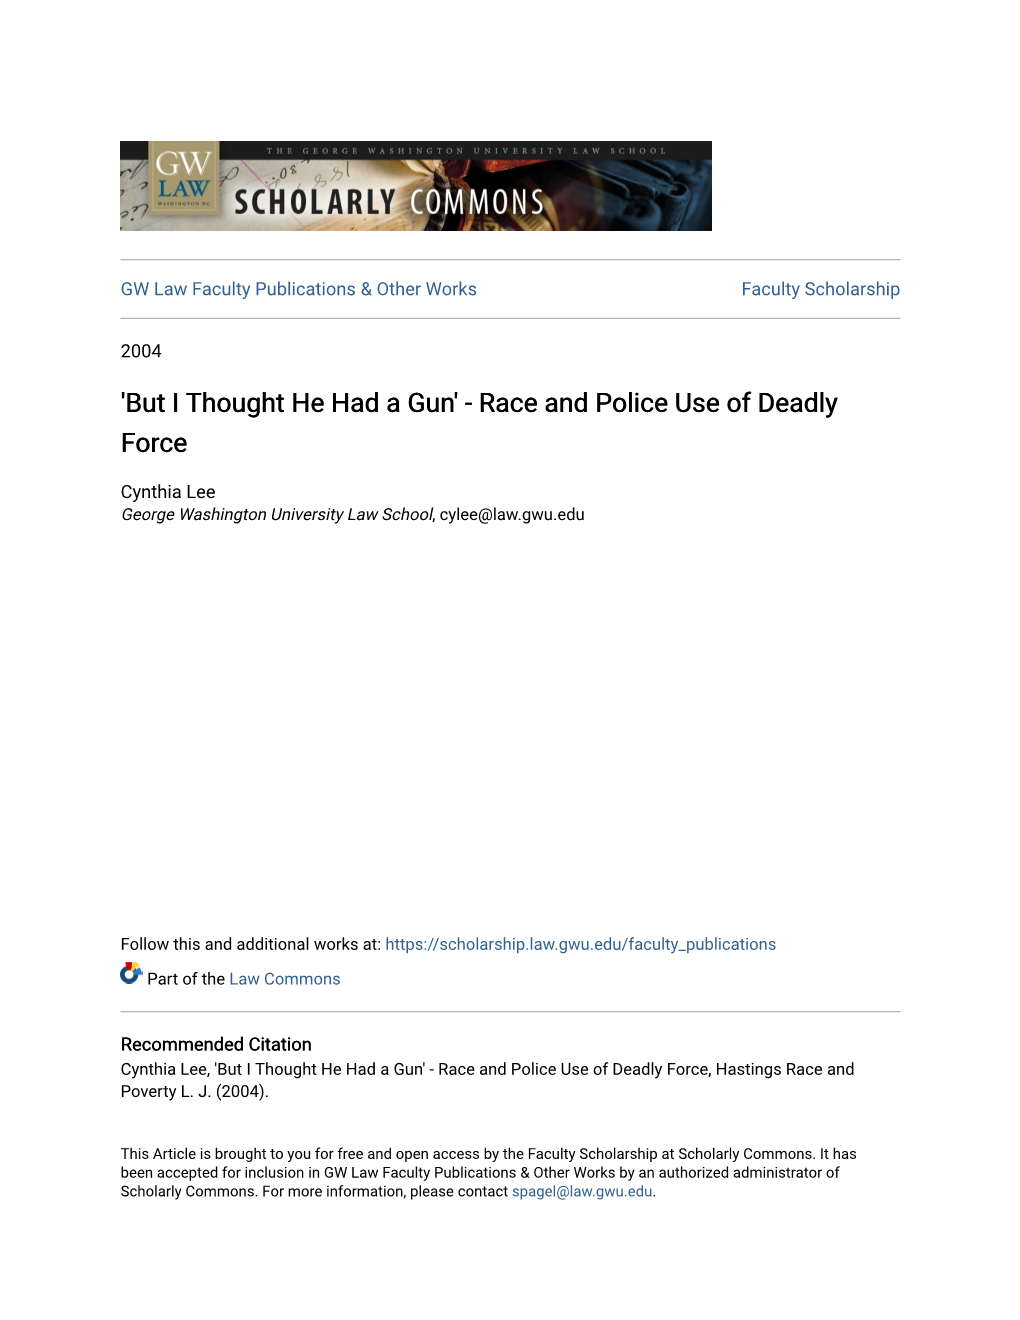 'But I Thought He Had a Gun' - Race and Police Use of Deadly Force